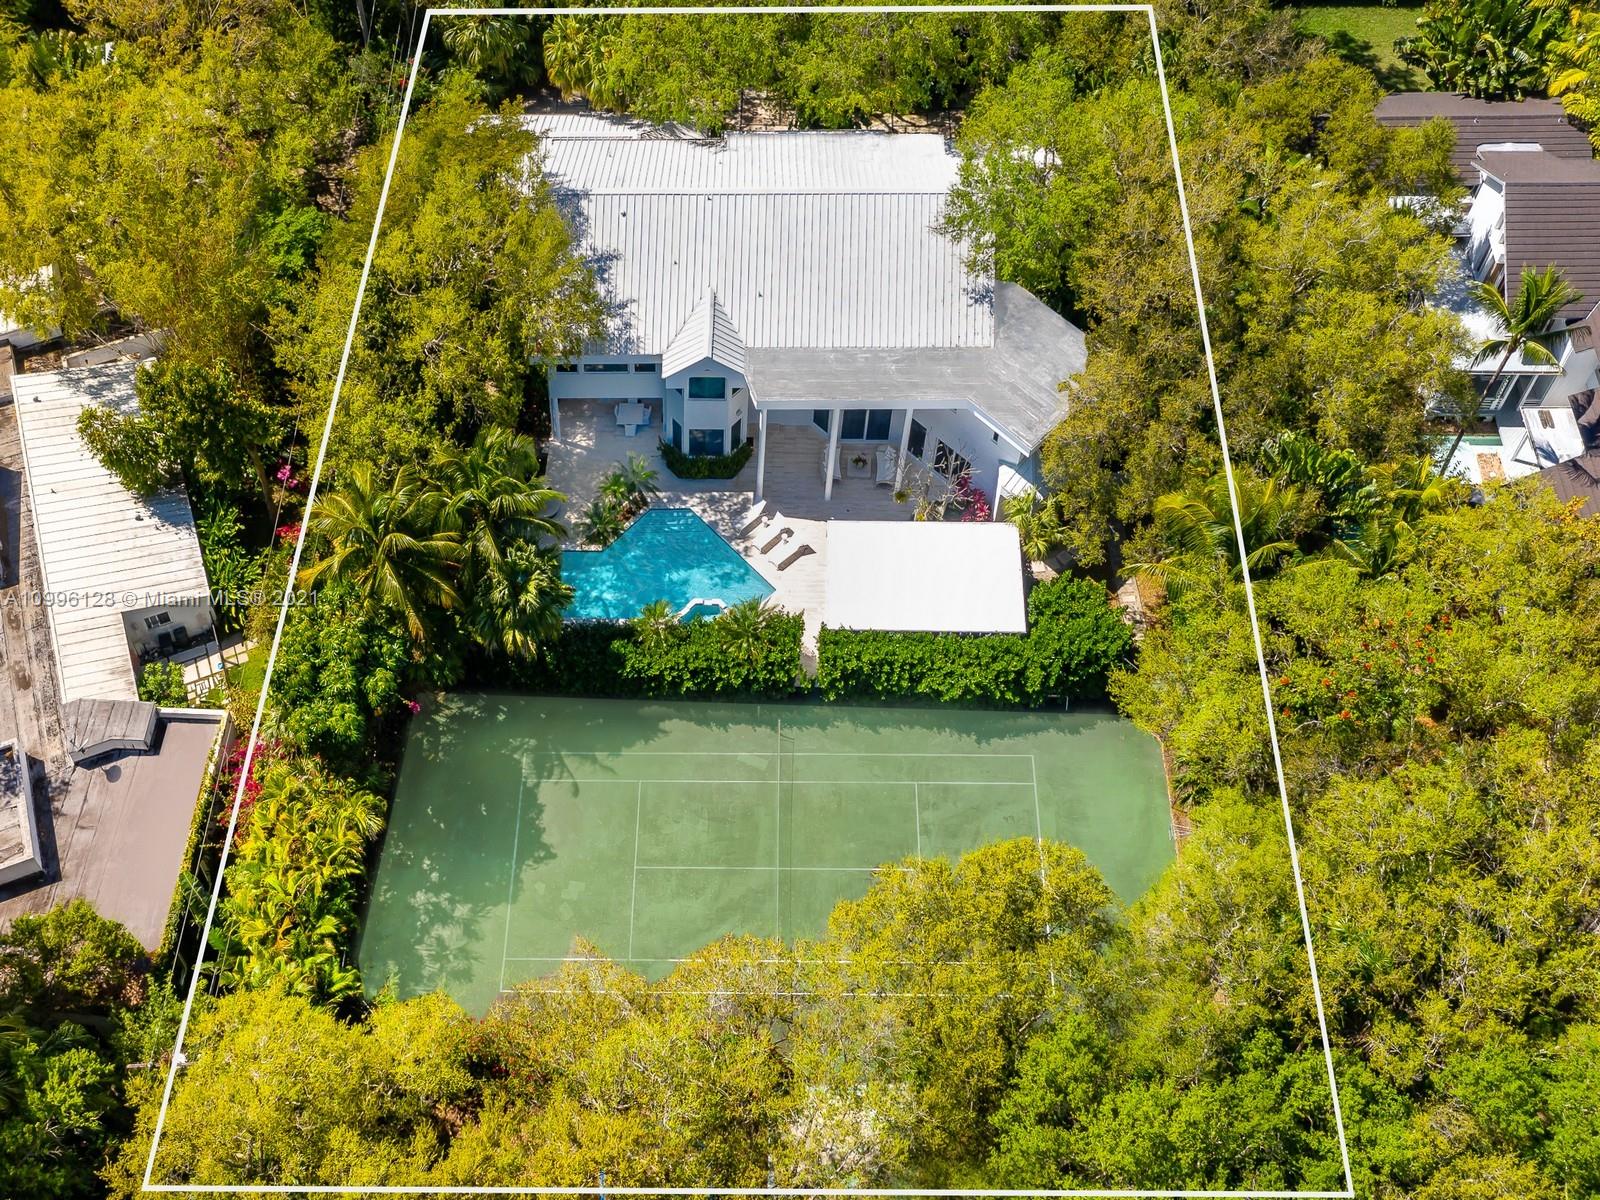 This MODERN Gem sits on nearly on a 38,161SF LOT nestled in a quiet enclave in CORAL GABLES.Take advantage of this unique opportunity to own a completely updated home featuring a tennis/basketball Ct,summer kitchen,pool+expansive garden made for entertaining.This beautiful home features 6 Bds,7 bths inside of its 8196  SF Total,w flr to ceiling windows which provide ample light throughout the house.On the 1st floor offers formal living+dinning room,completely updated kitchen w top of the line wolf appliances+built in Nespresso Machine,office,guest suite,family room.Upstairs offers master suite w oversized his+her closets,+3 adtl bedrooms.Equipped with tin roof,generator,2 car garage+2 carports,impact windows throughout,surround sound+security system,this gated home is a family’s dream!